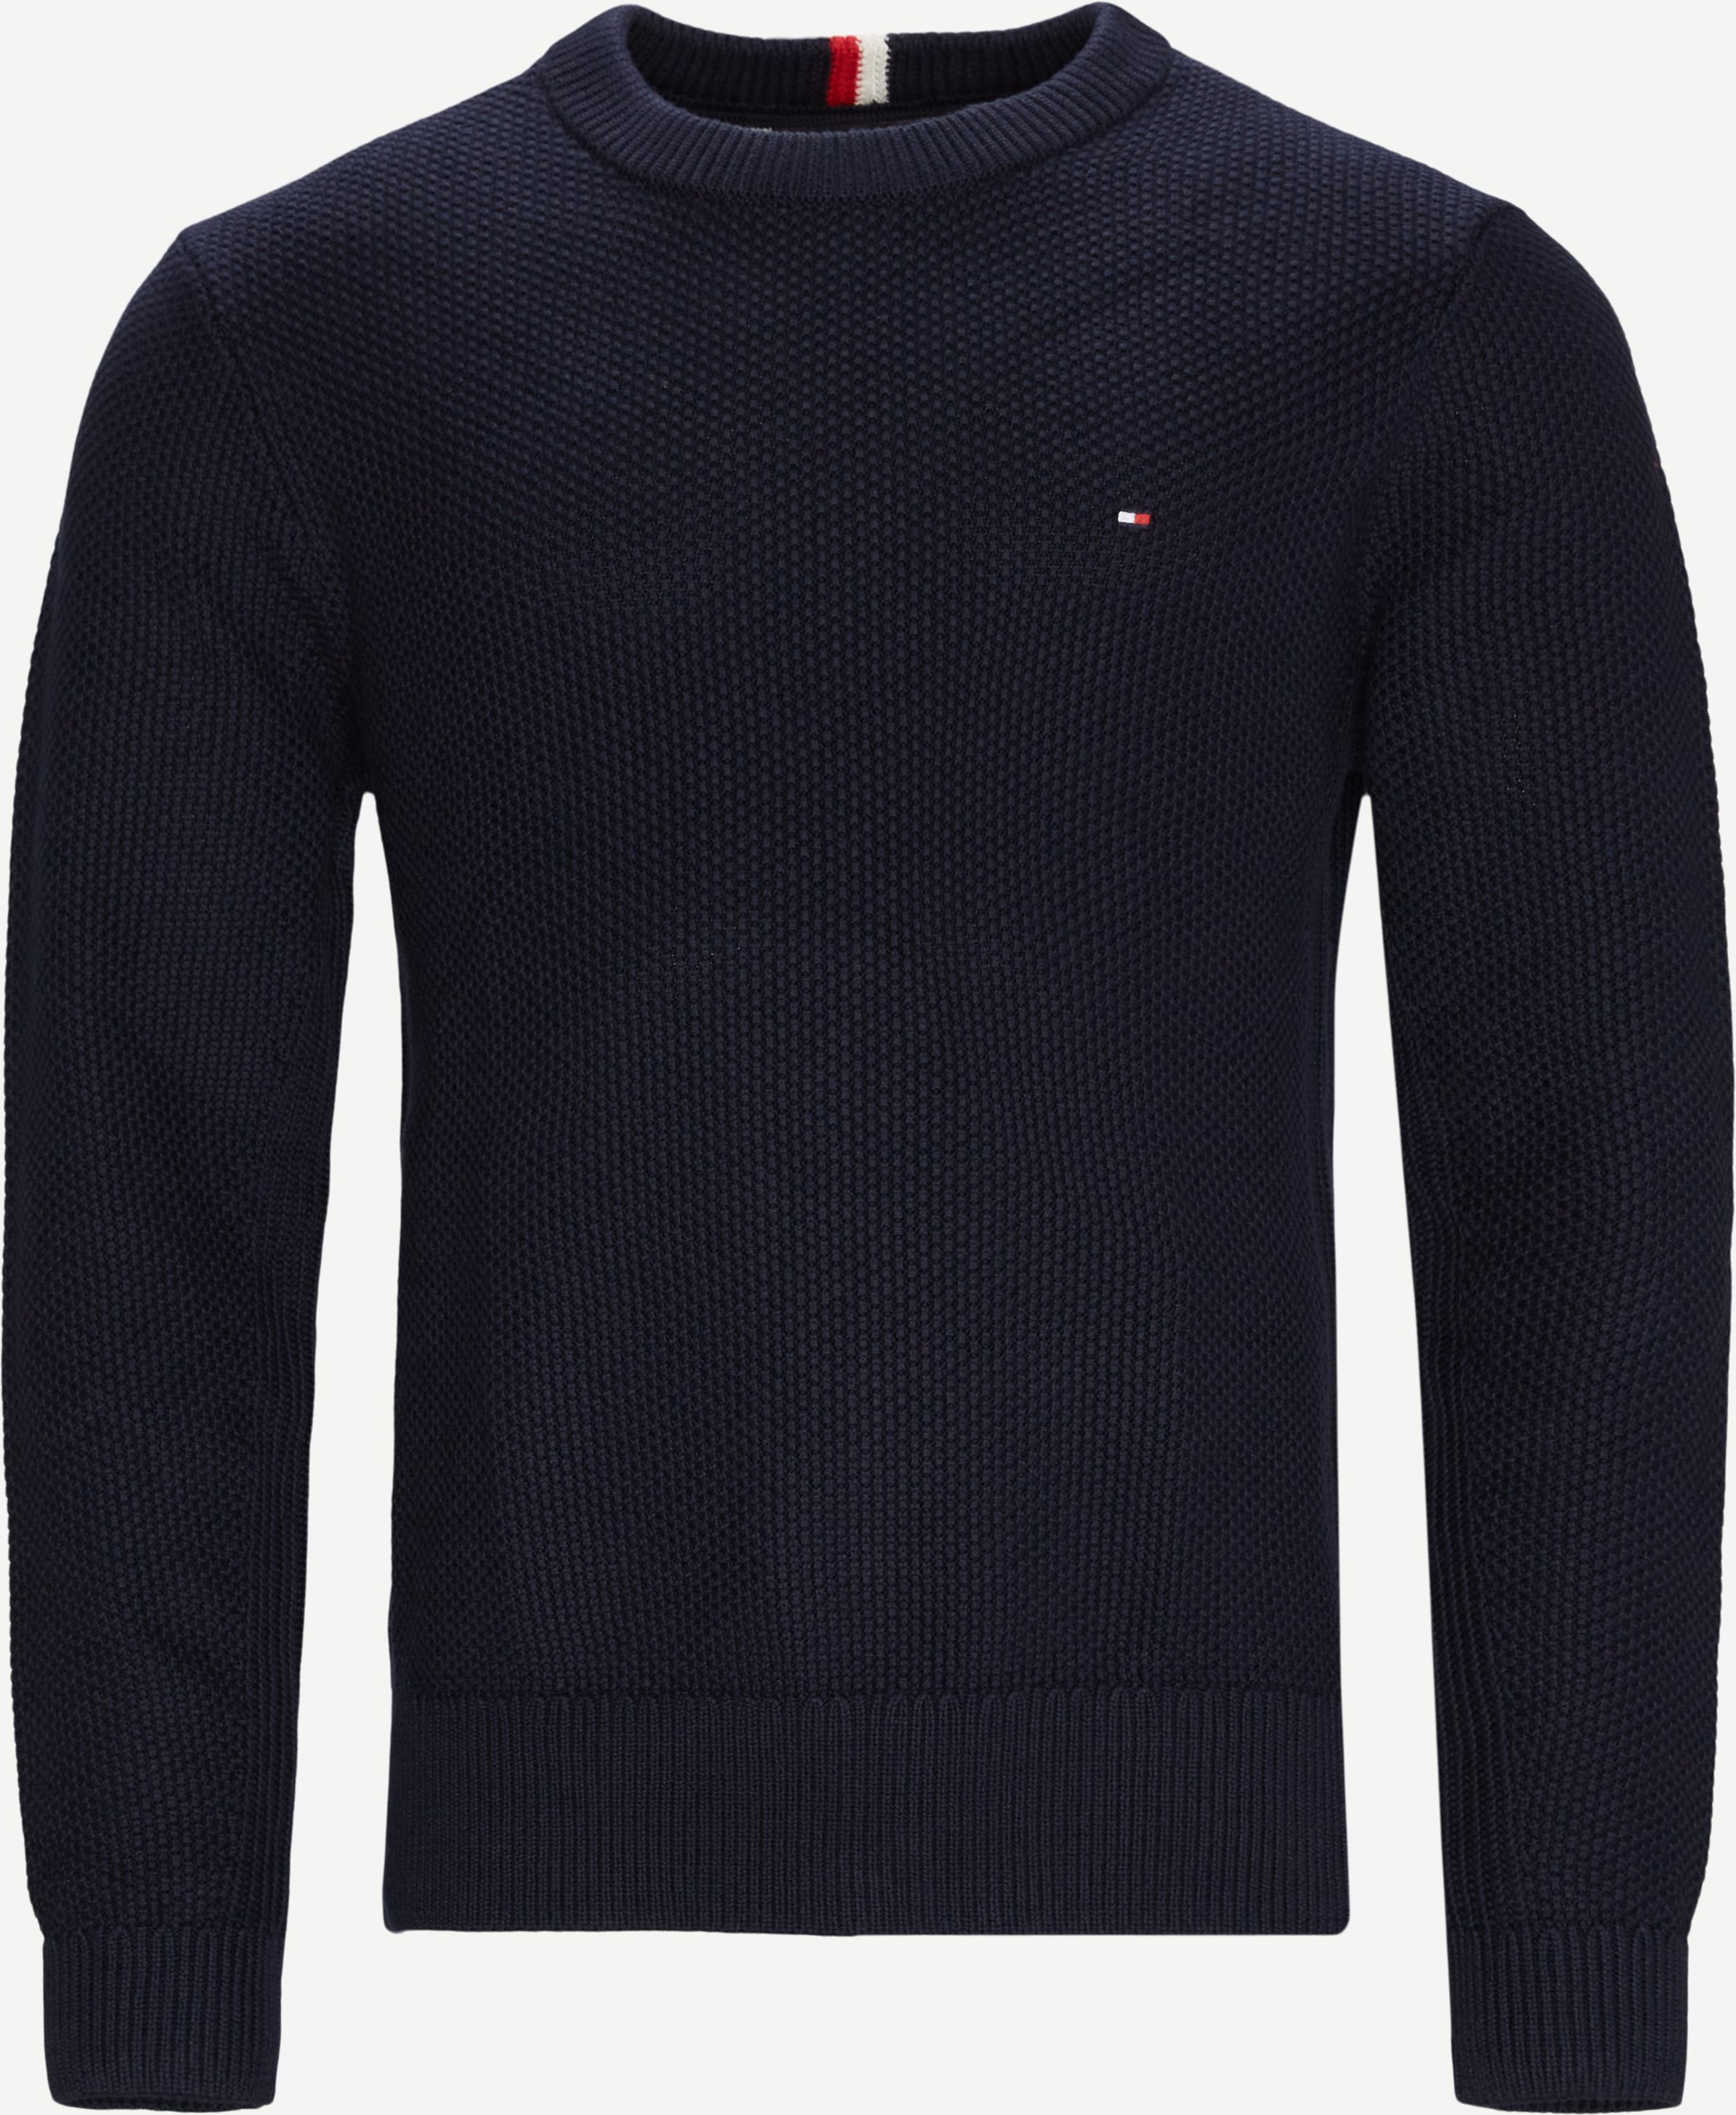 Exaggerated Structure Crew Neck Strik - Knitwear - Regular fit - Blue